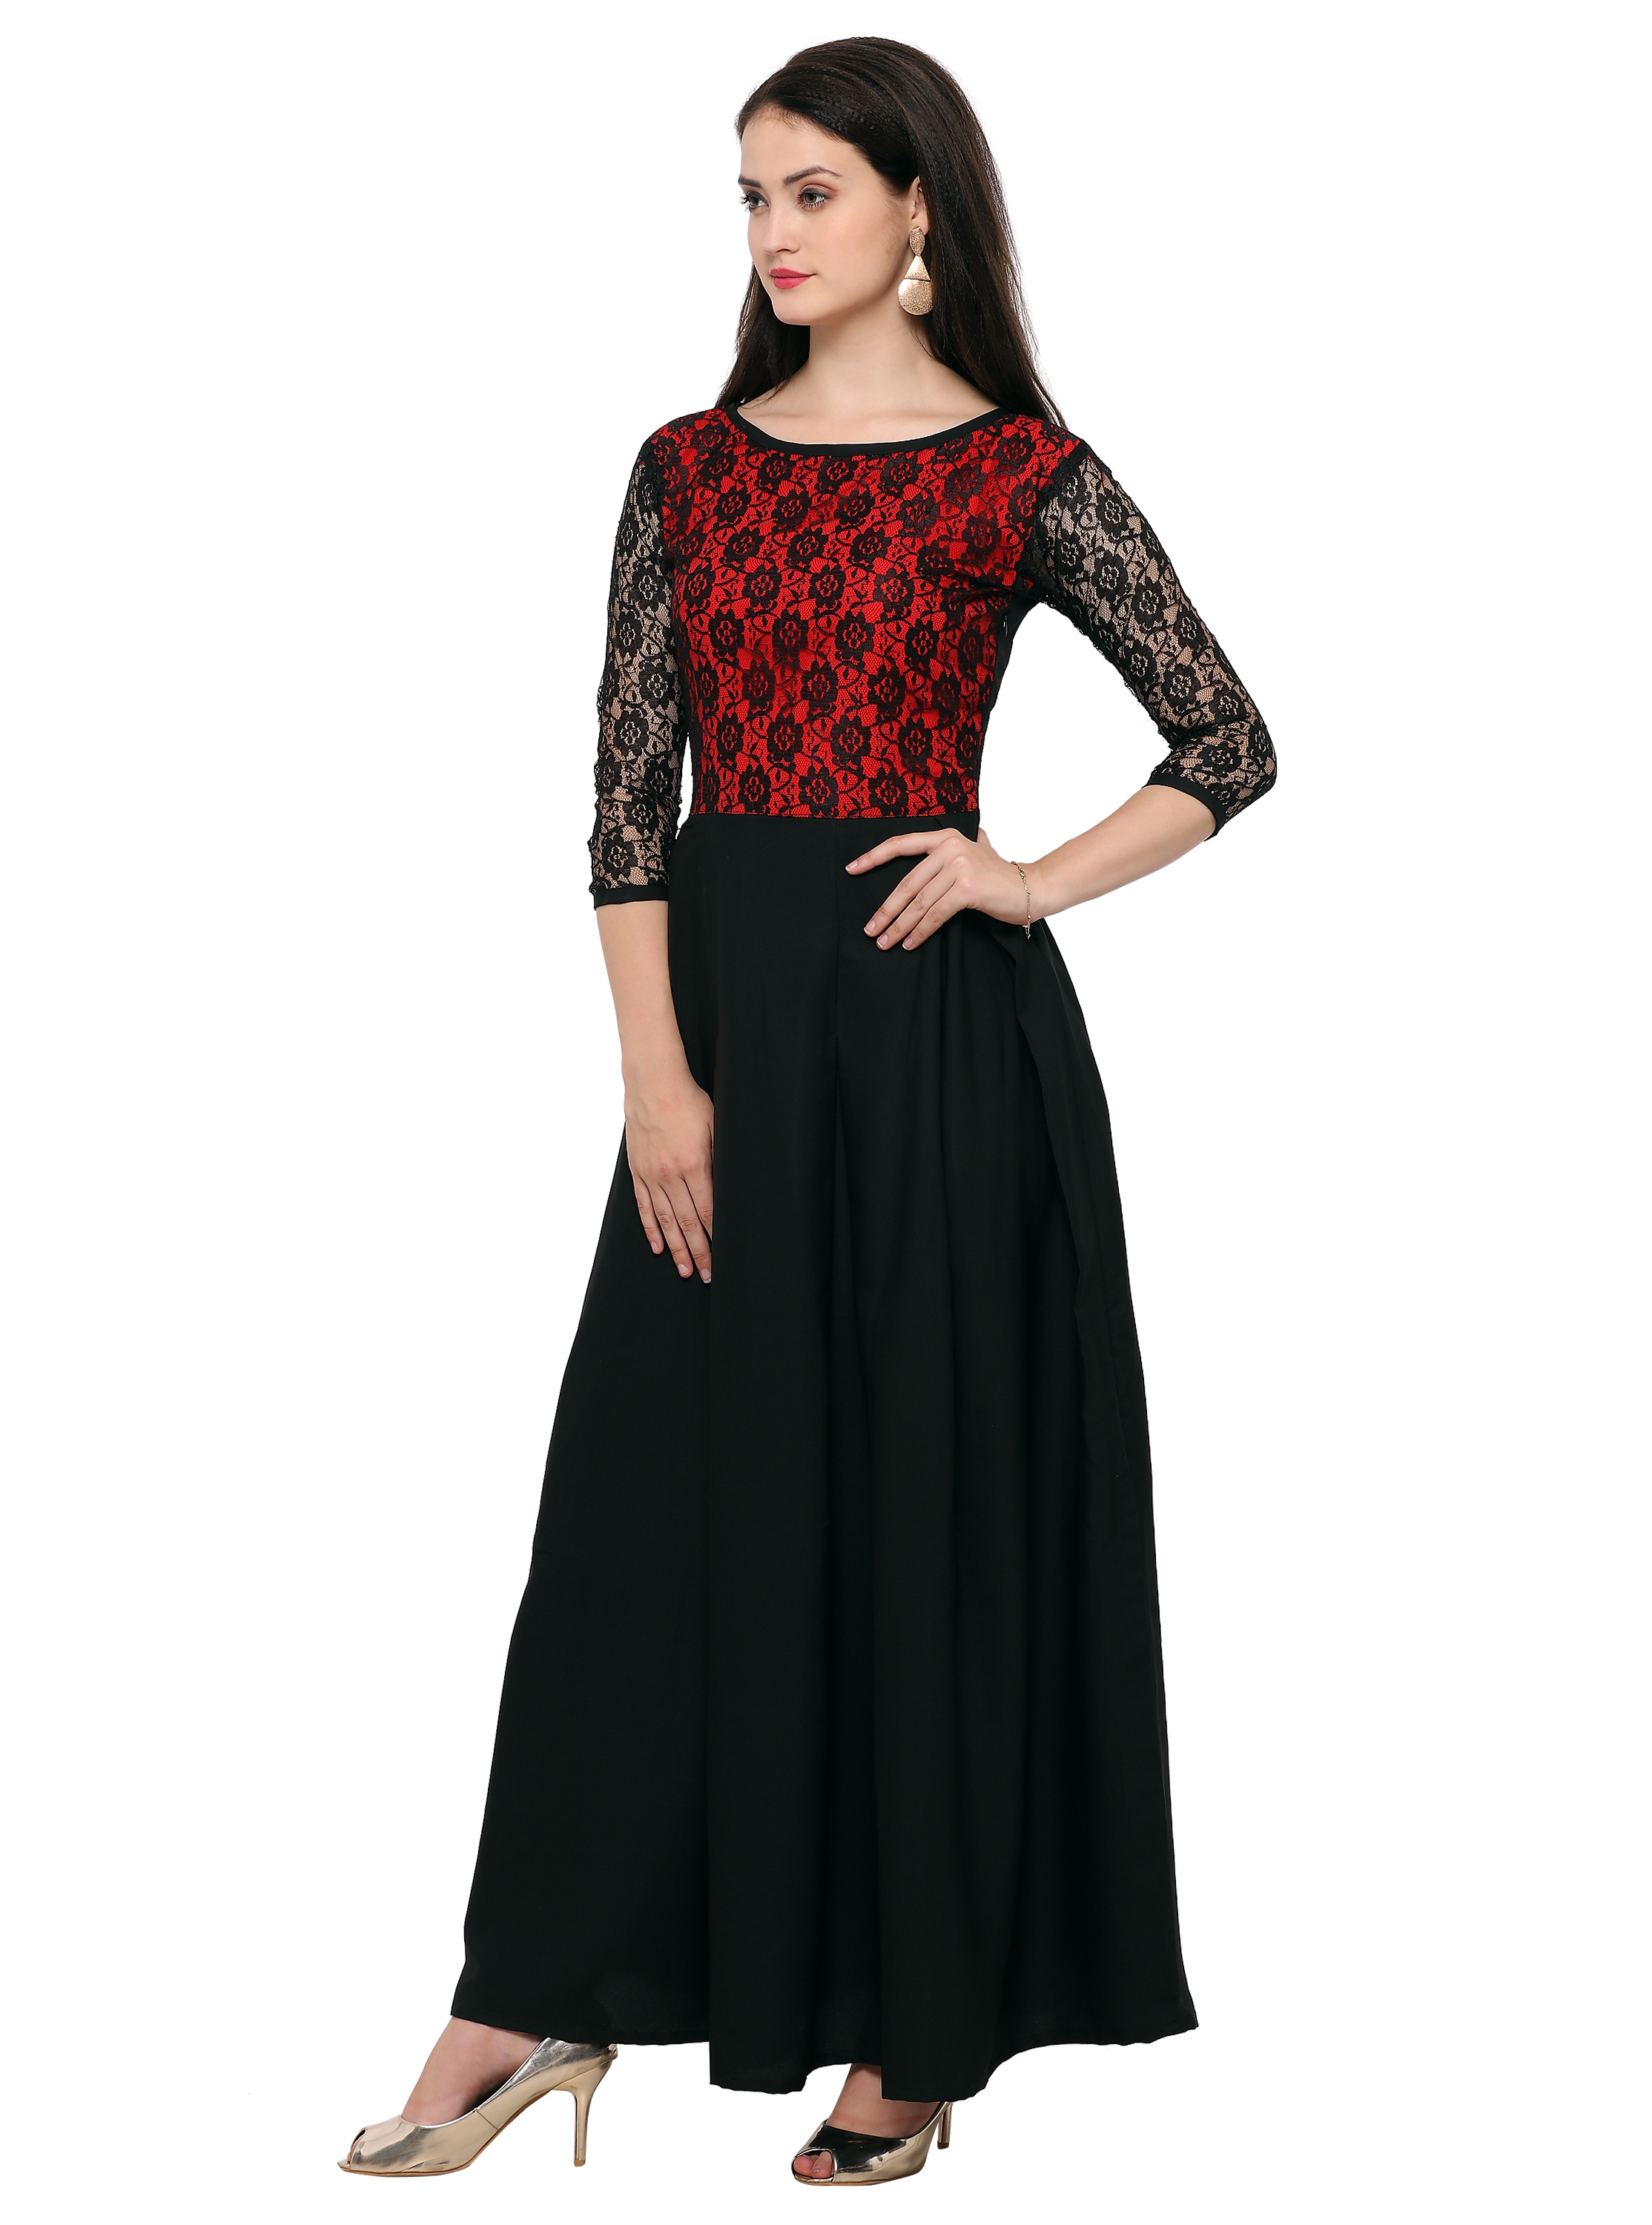 Buy Women's Maxi Red Dress Online @ ₹699 from ShopClues